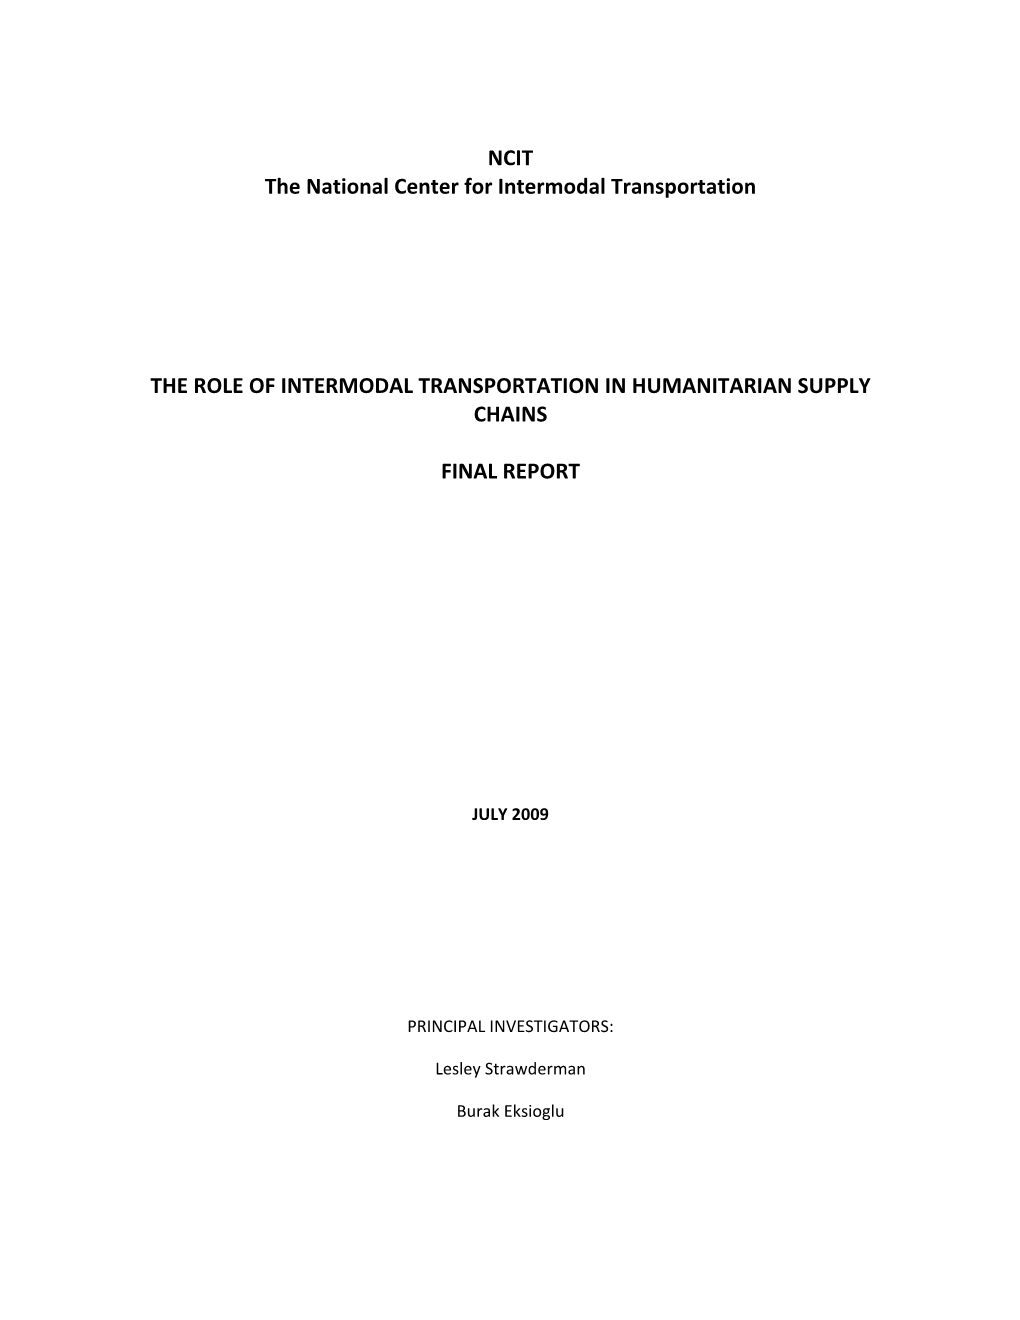 The Role of Intermodal Transportation in Humanitarian Supply Chains